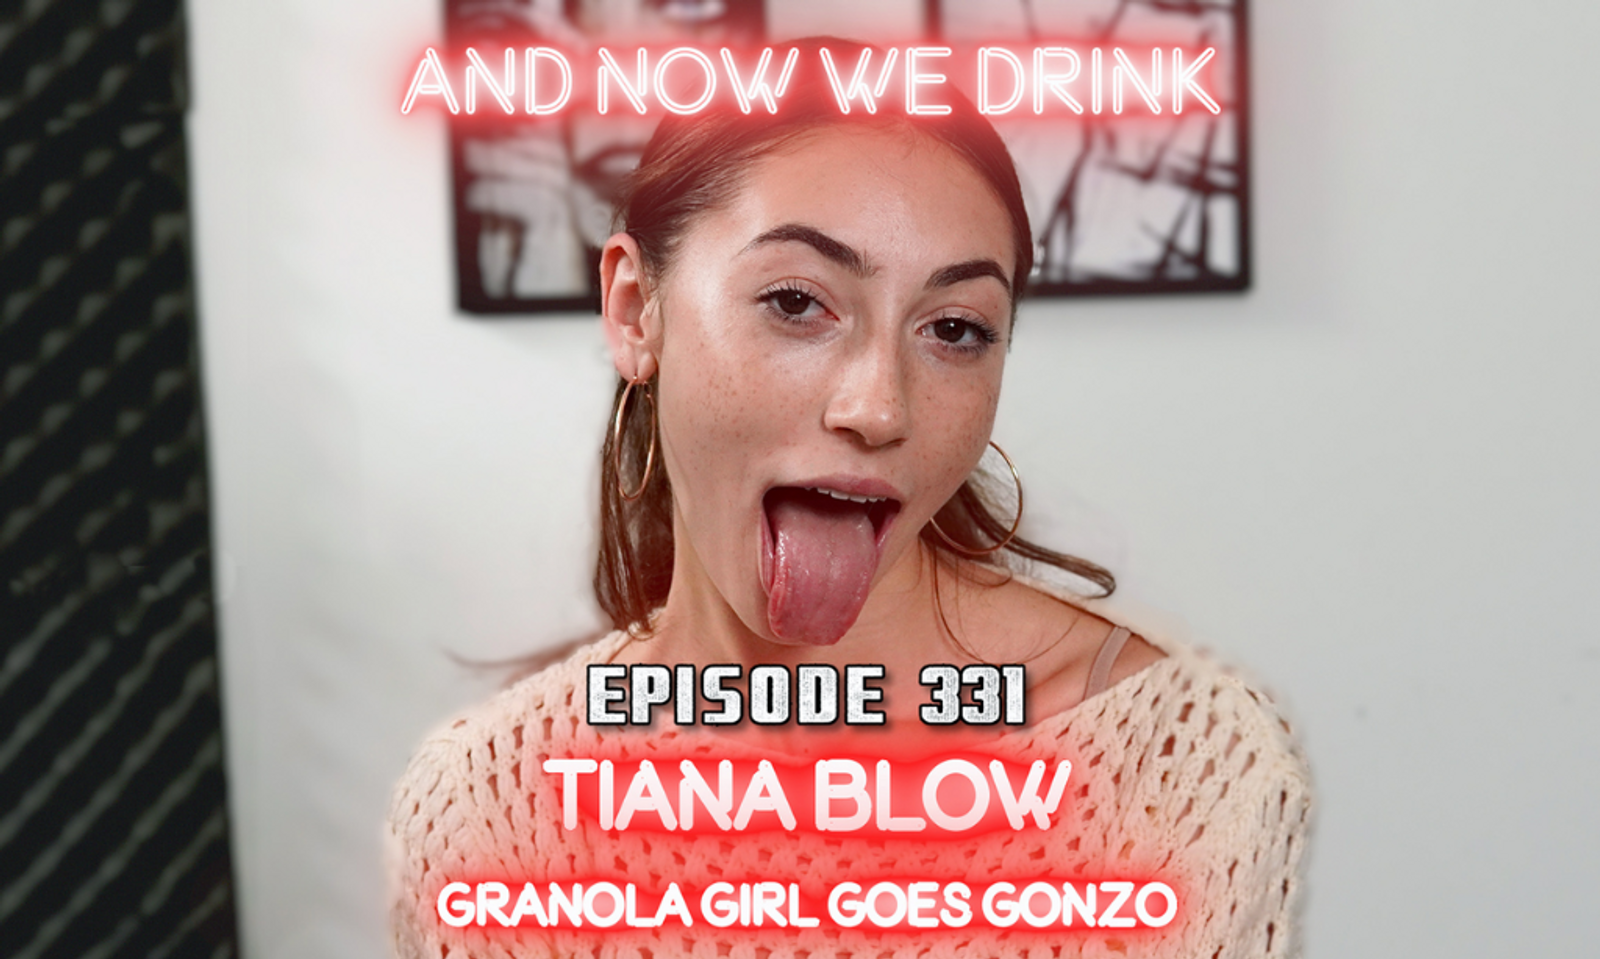 Tiana Blow Guests on This Week’s ‘And Now We Drink’ Podcast